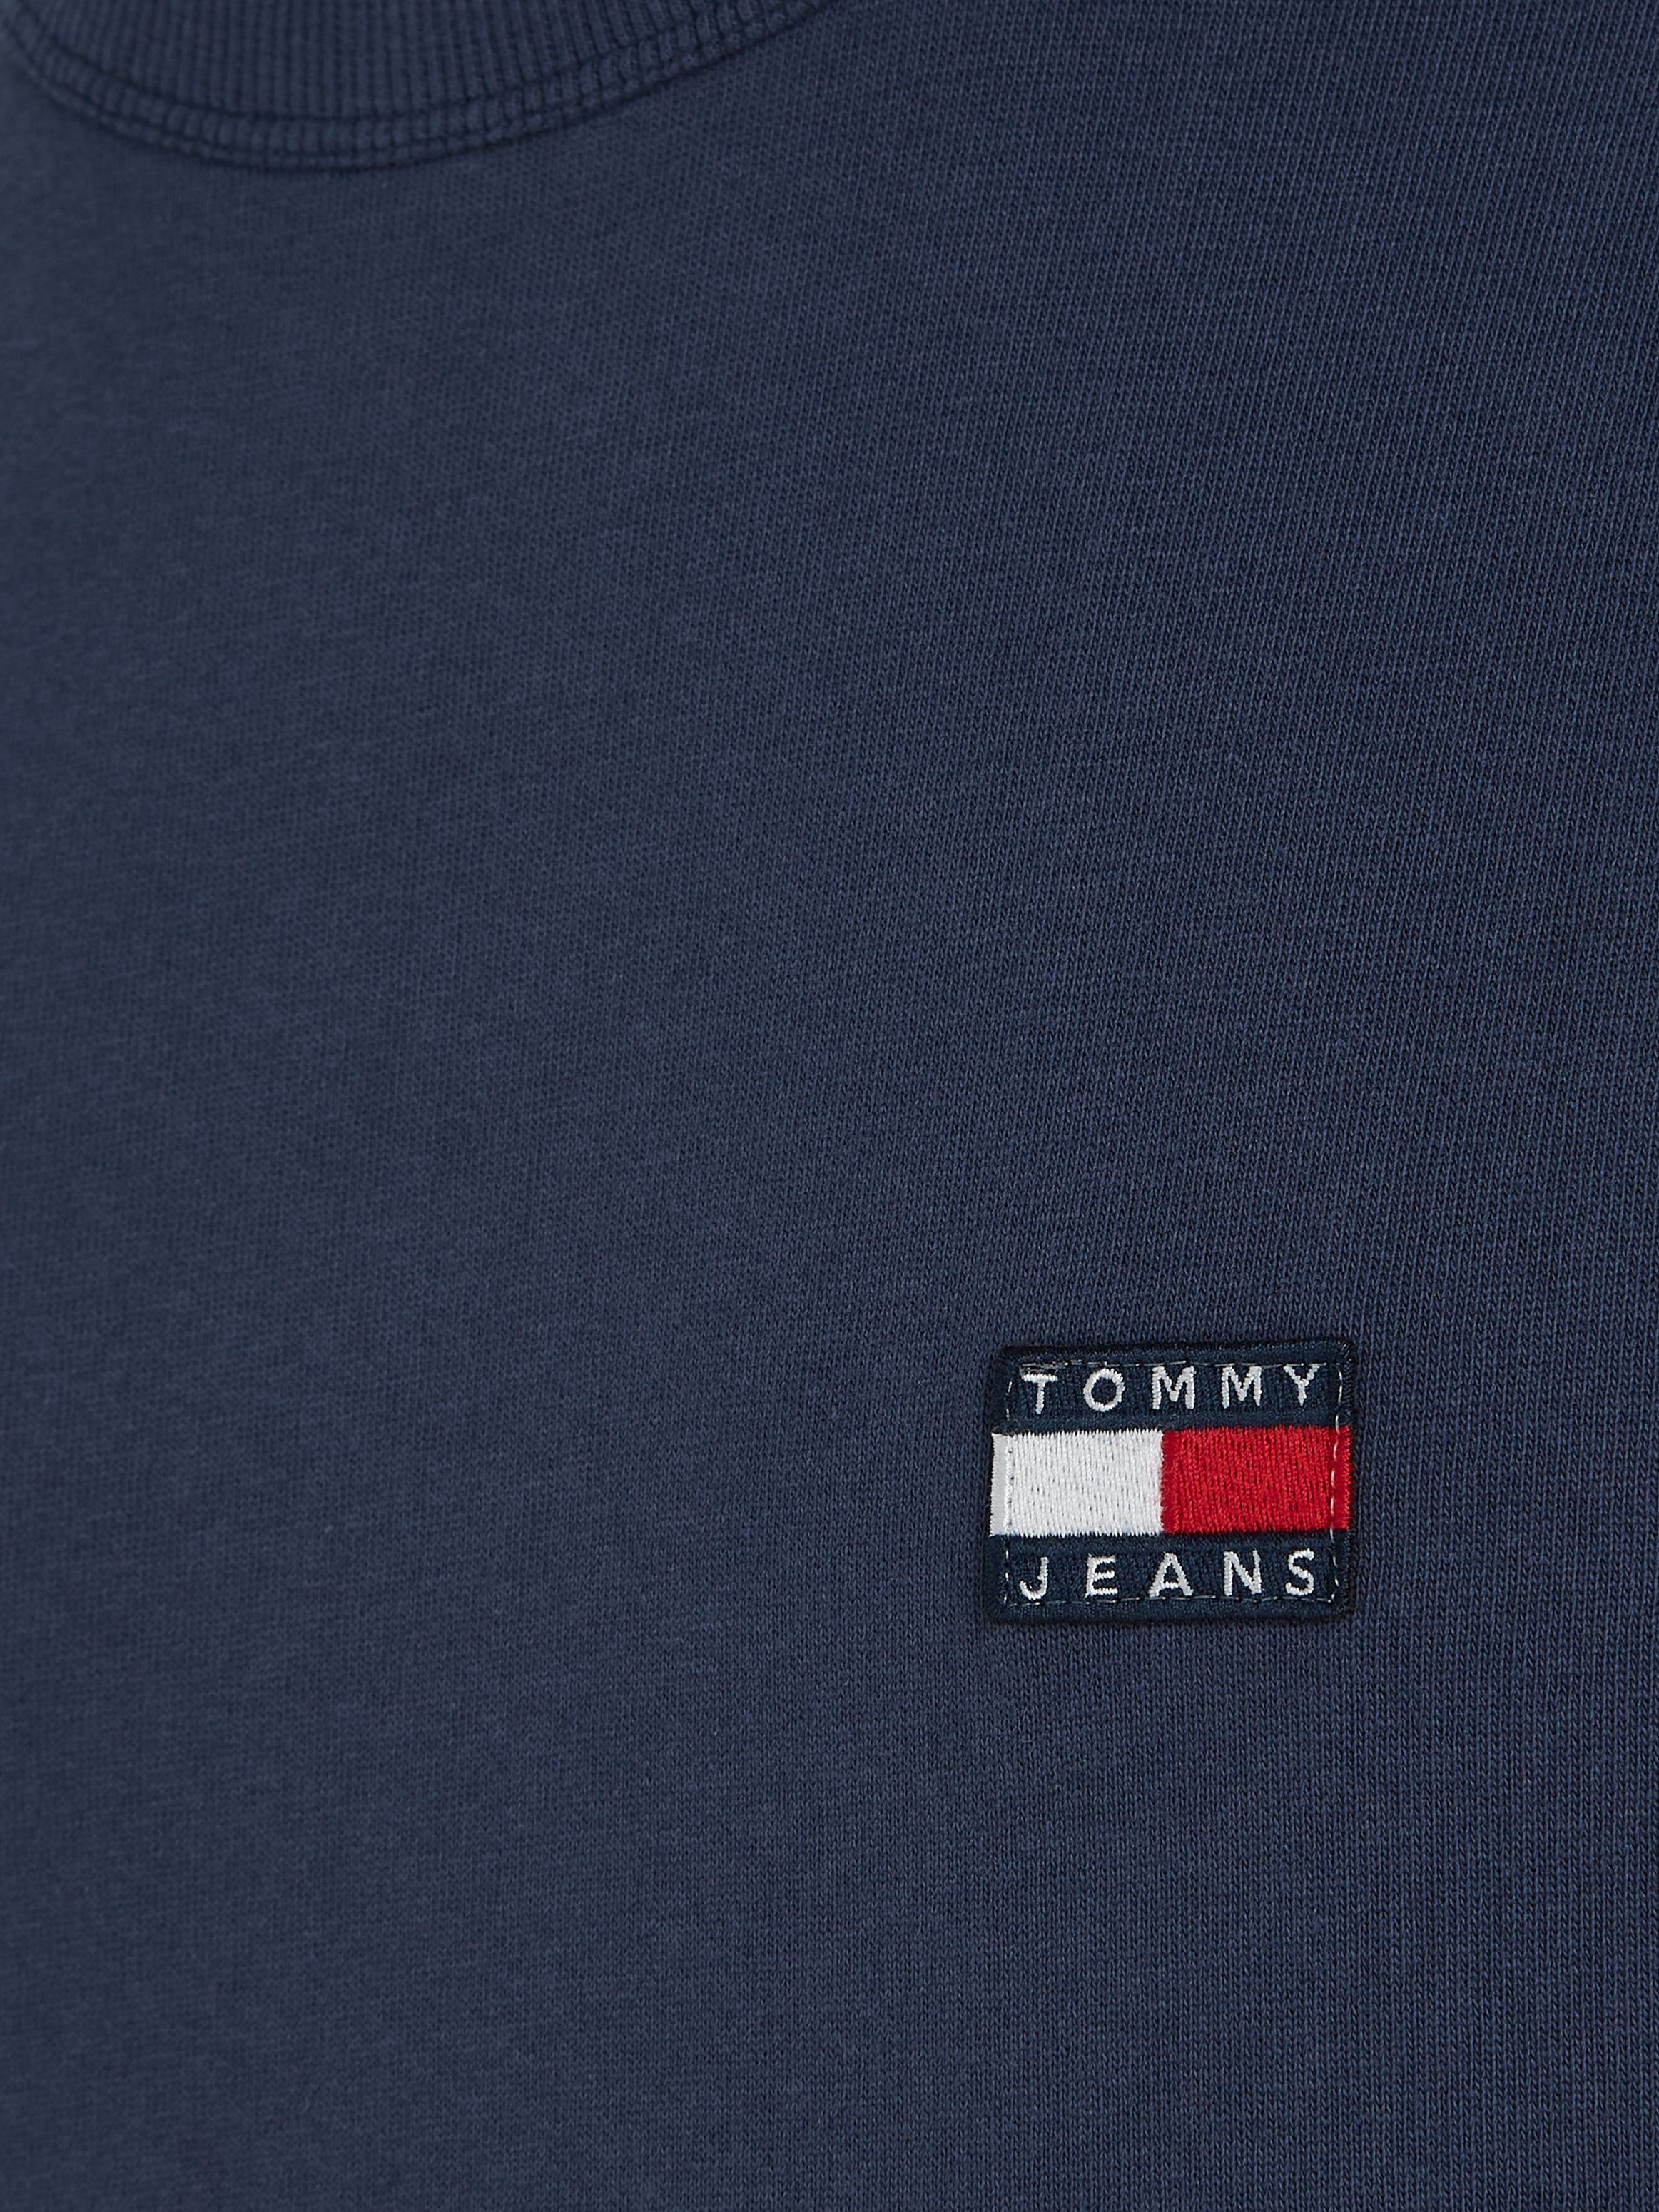 XS TJM TOMMY TEE Navy Tommy Jeans BADGE T-Shirt Twilight CLSC